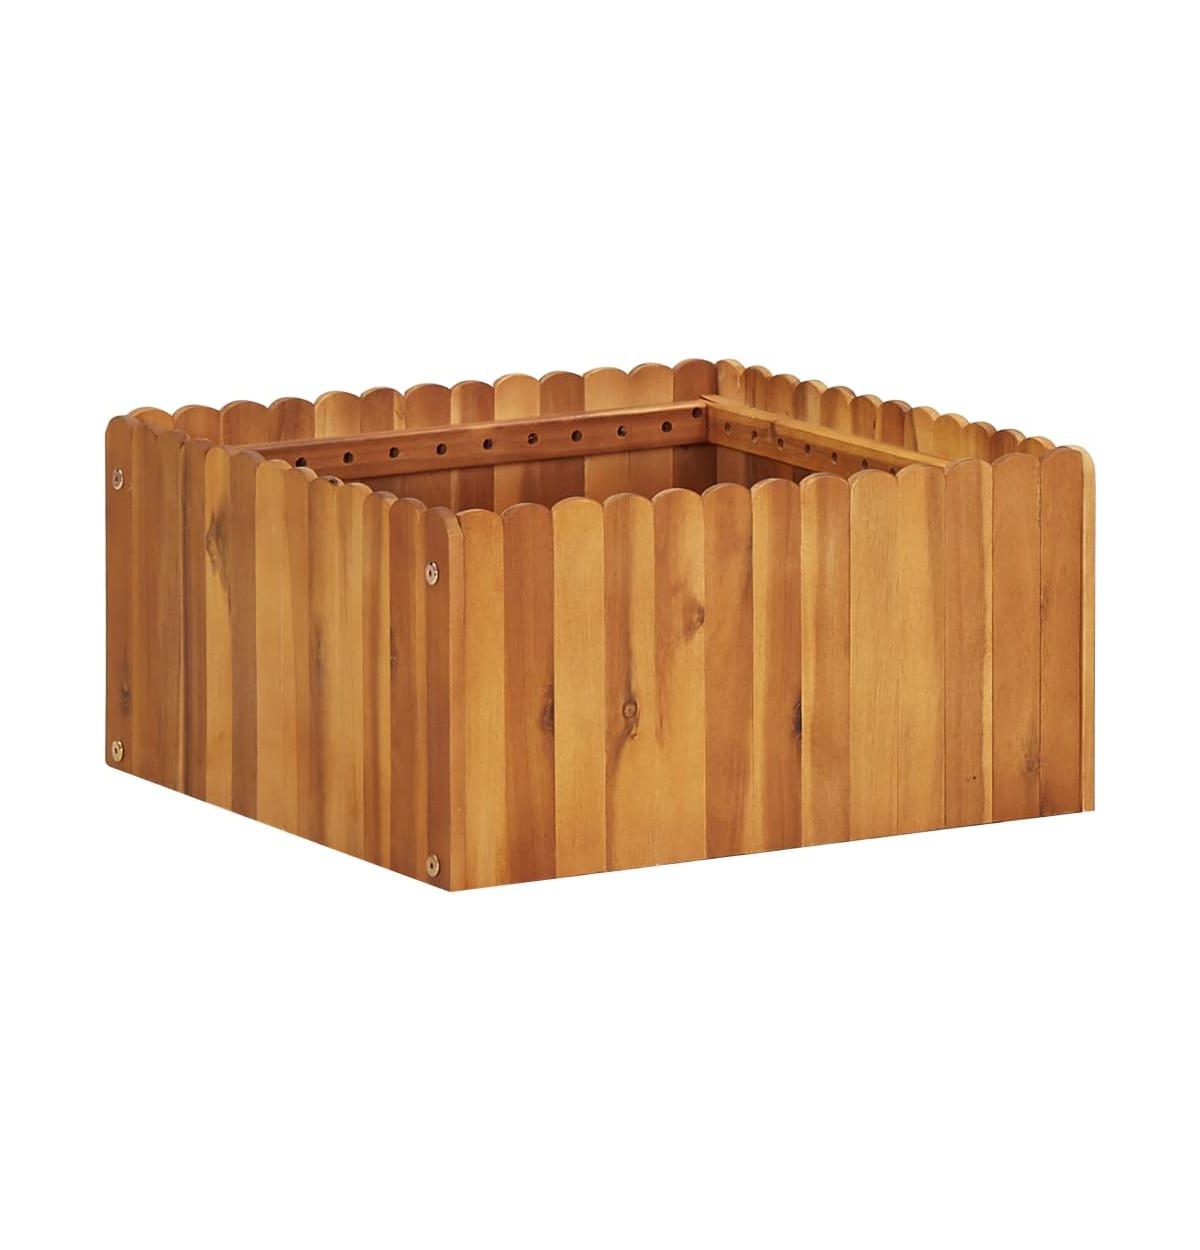 Garden Raised Bed 19.6"x19.6"x9.8" Solid Acacia Wood - Brown